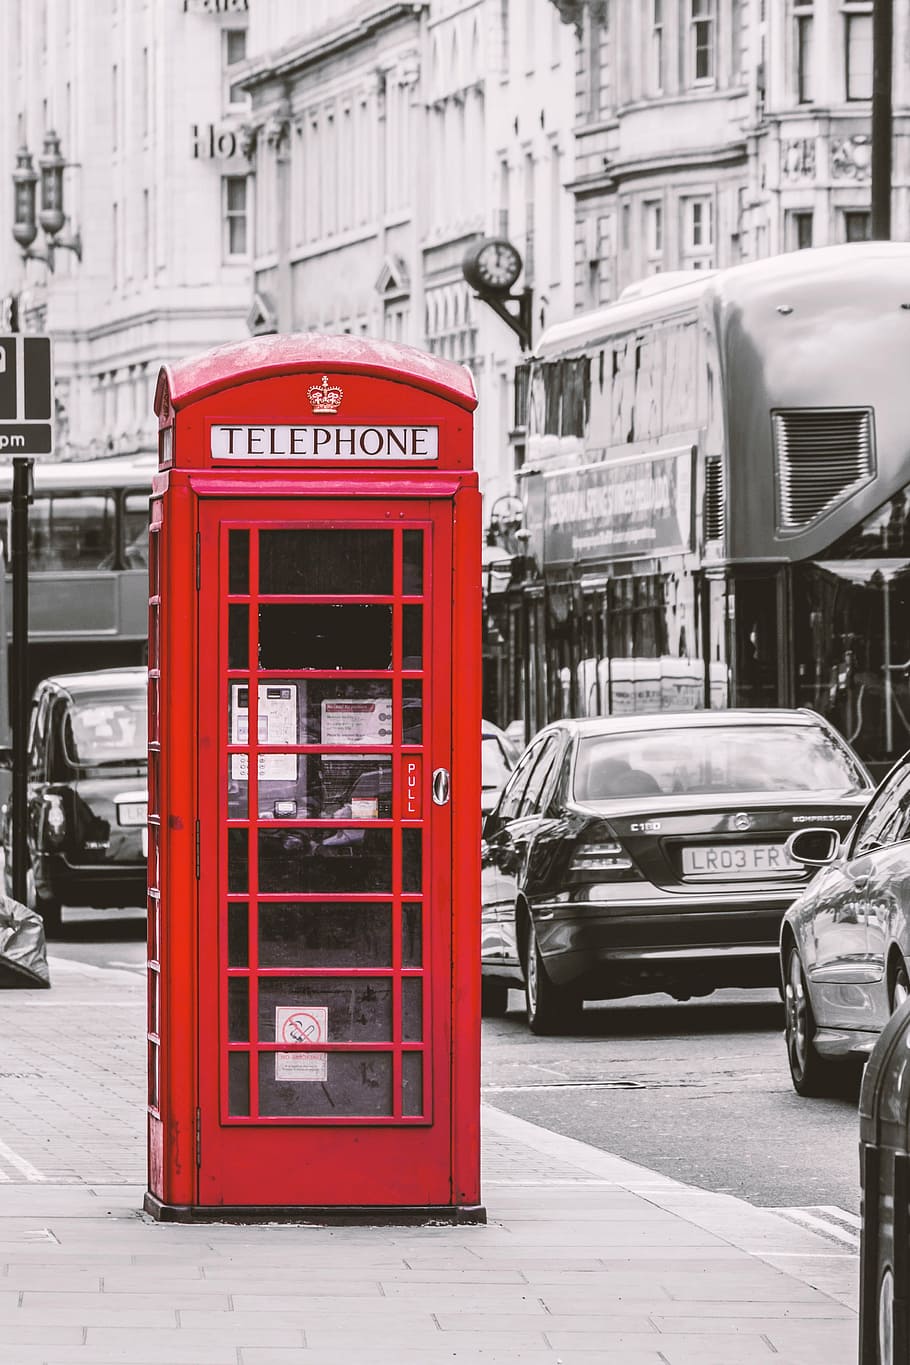 selective color of red Telephone booth, london, england, red telephone box